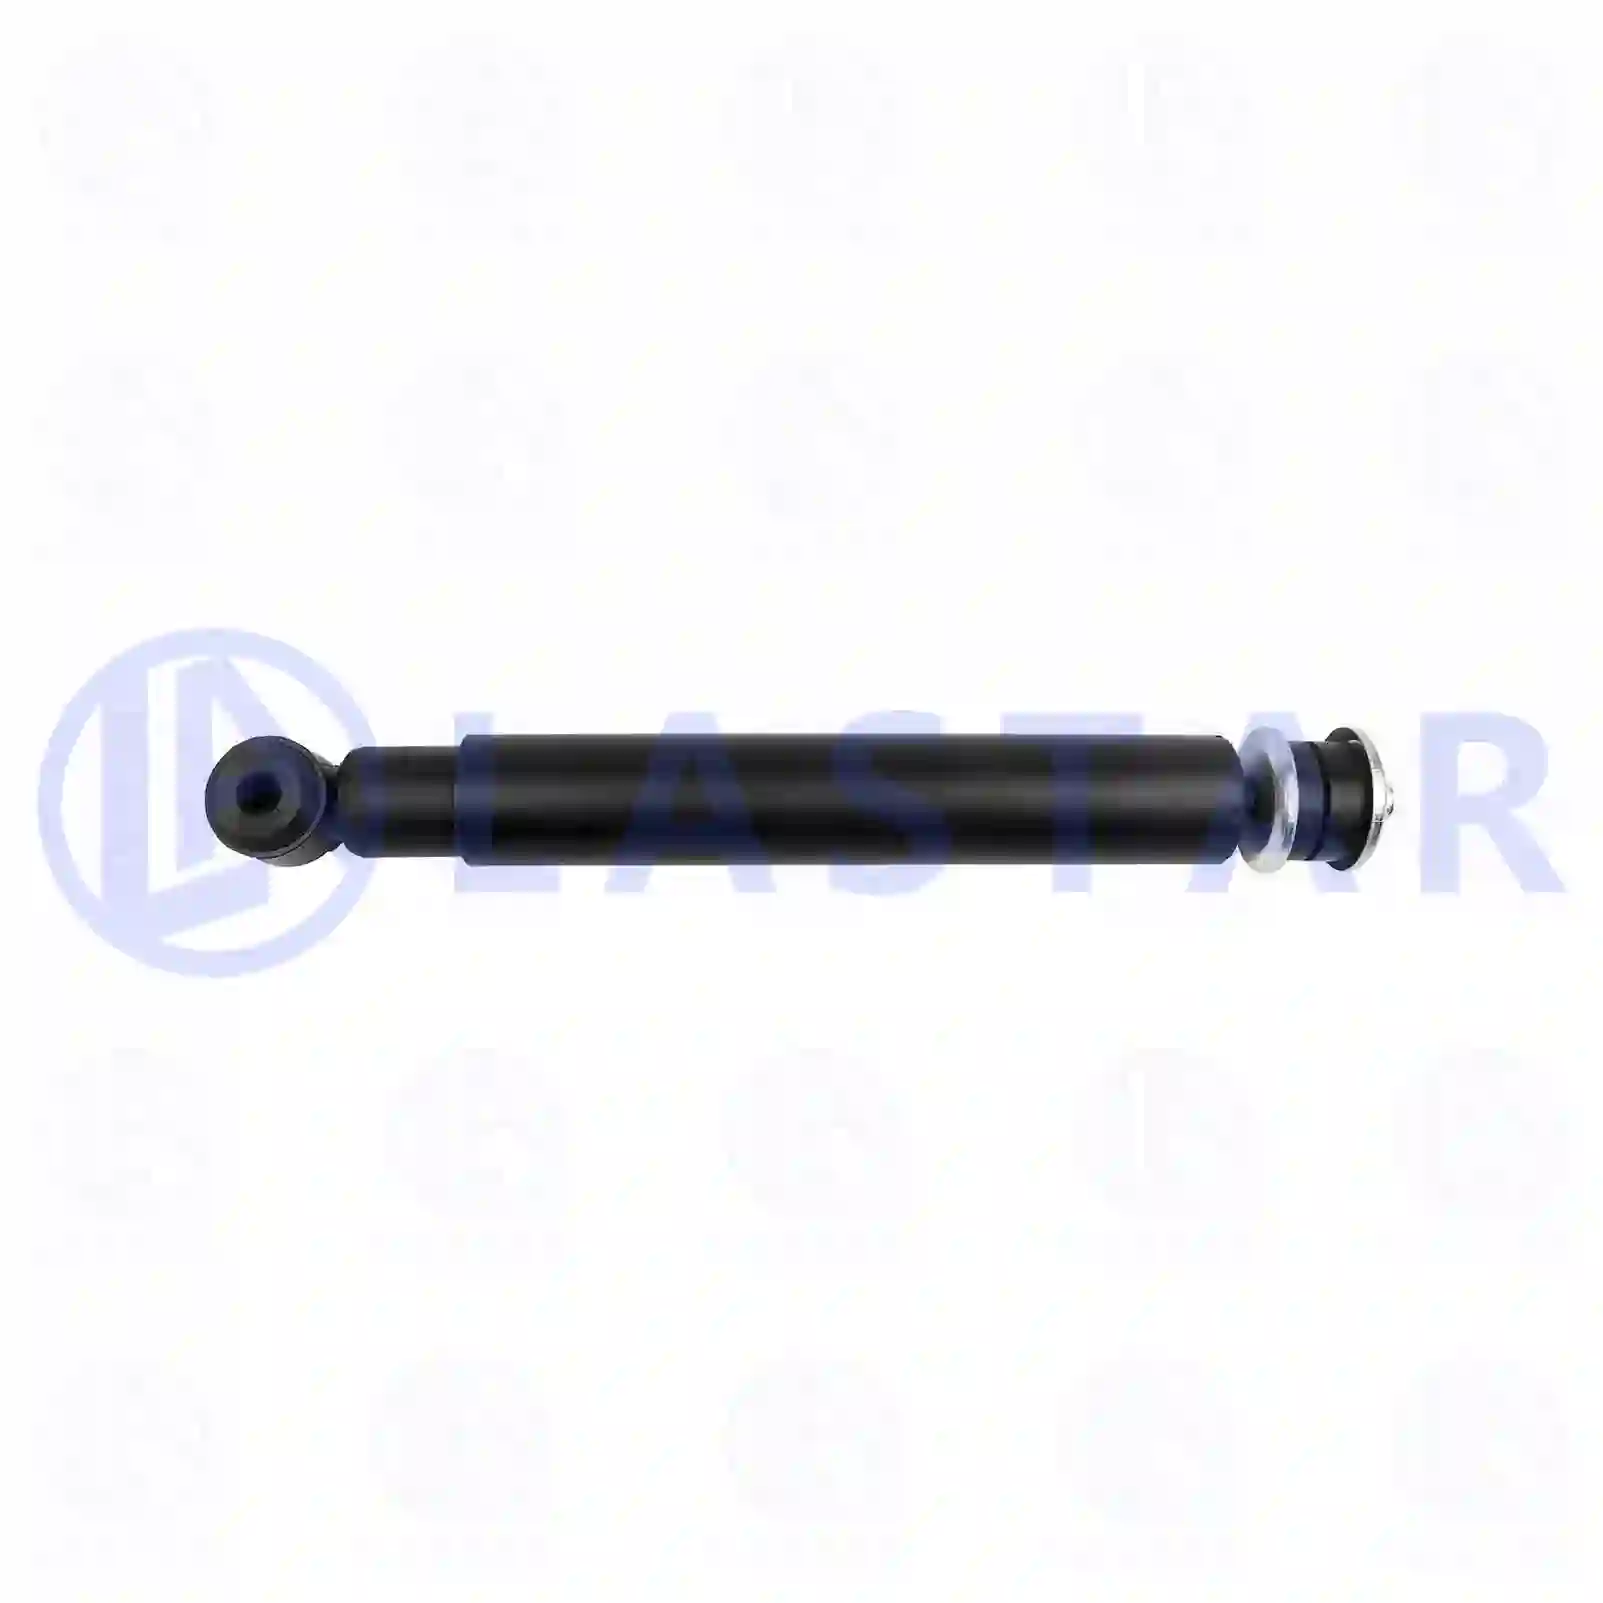 Shock absorber, 77730128, 1353105, 1353105, ZG41519-0008, , , , ||  77730128 Lastar Spare Part | Truck Spare Parts, Auotomotive Spare Parts Shock absorber, 77730128, 1353105, 1353105, ZG41519-0008, , , , ||  77730128 Lastar Spare Part | Truck Spare Parts, Auotomotive Spare Parts